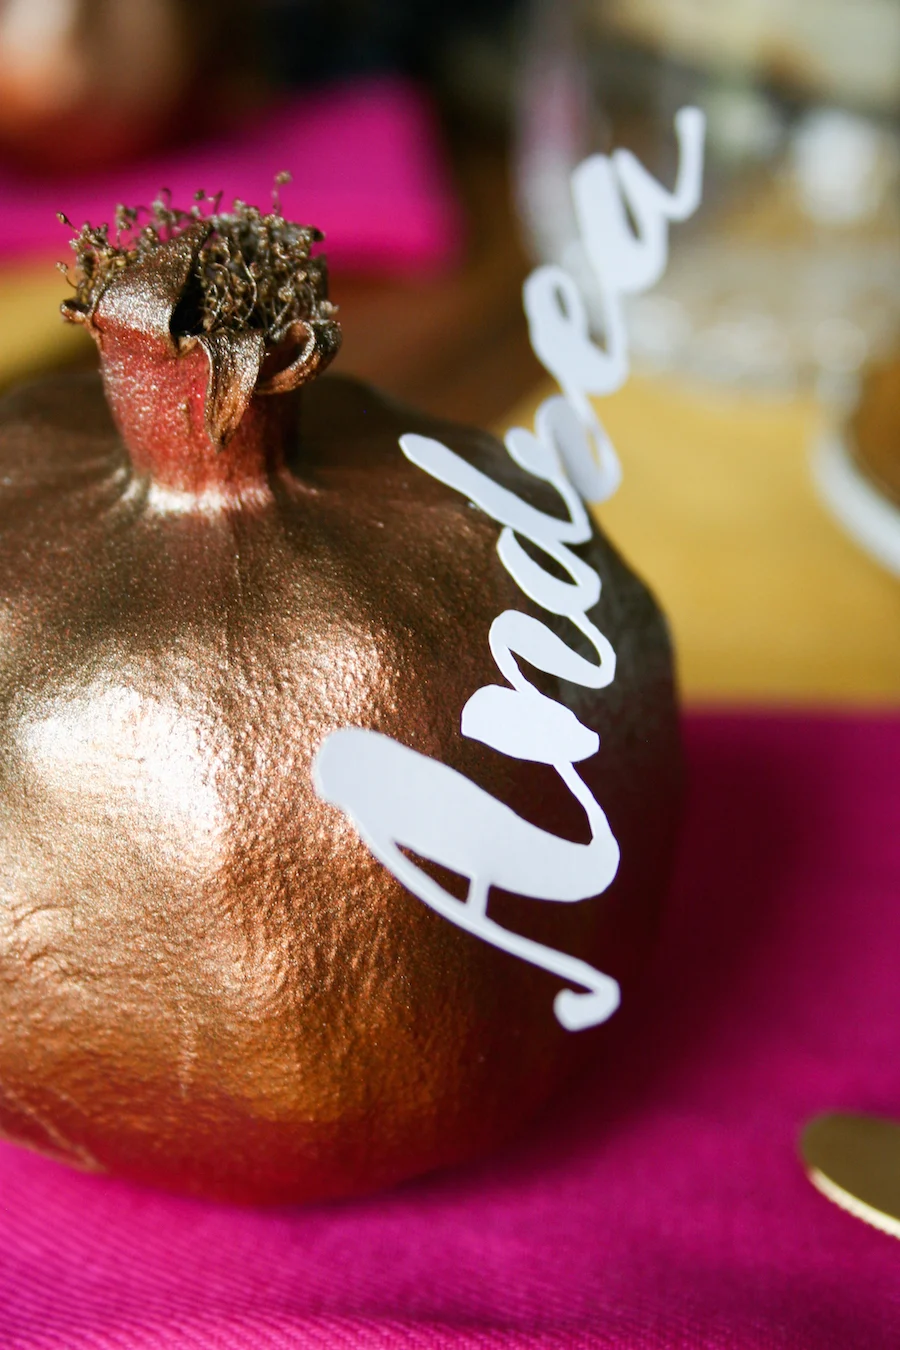 DIY Pomegranate Placecard for Thanksgiving // Legal Miss Sunshine